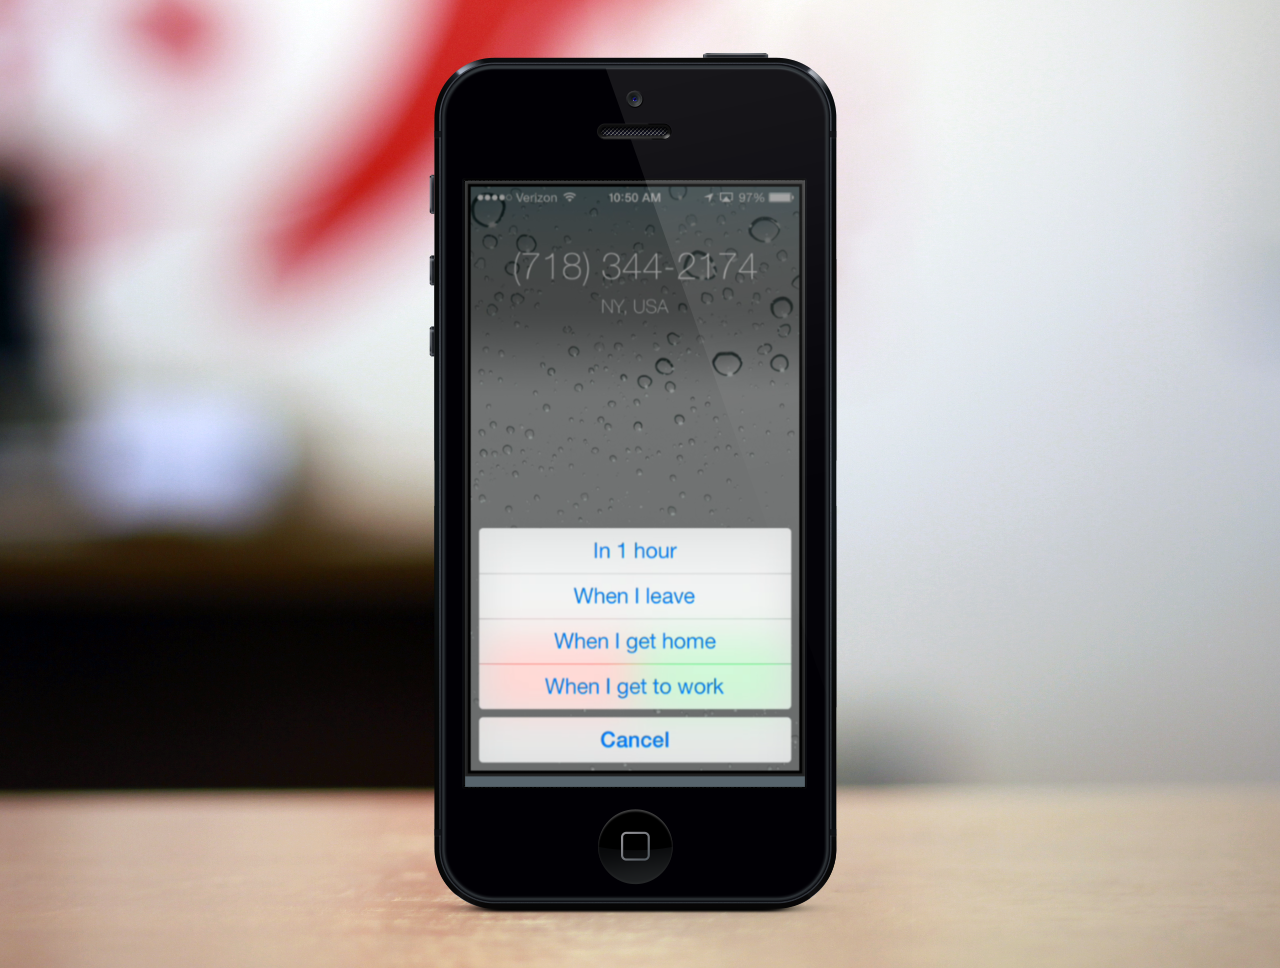 Call Reminders in iOS 7